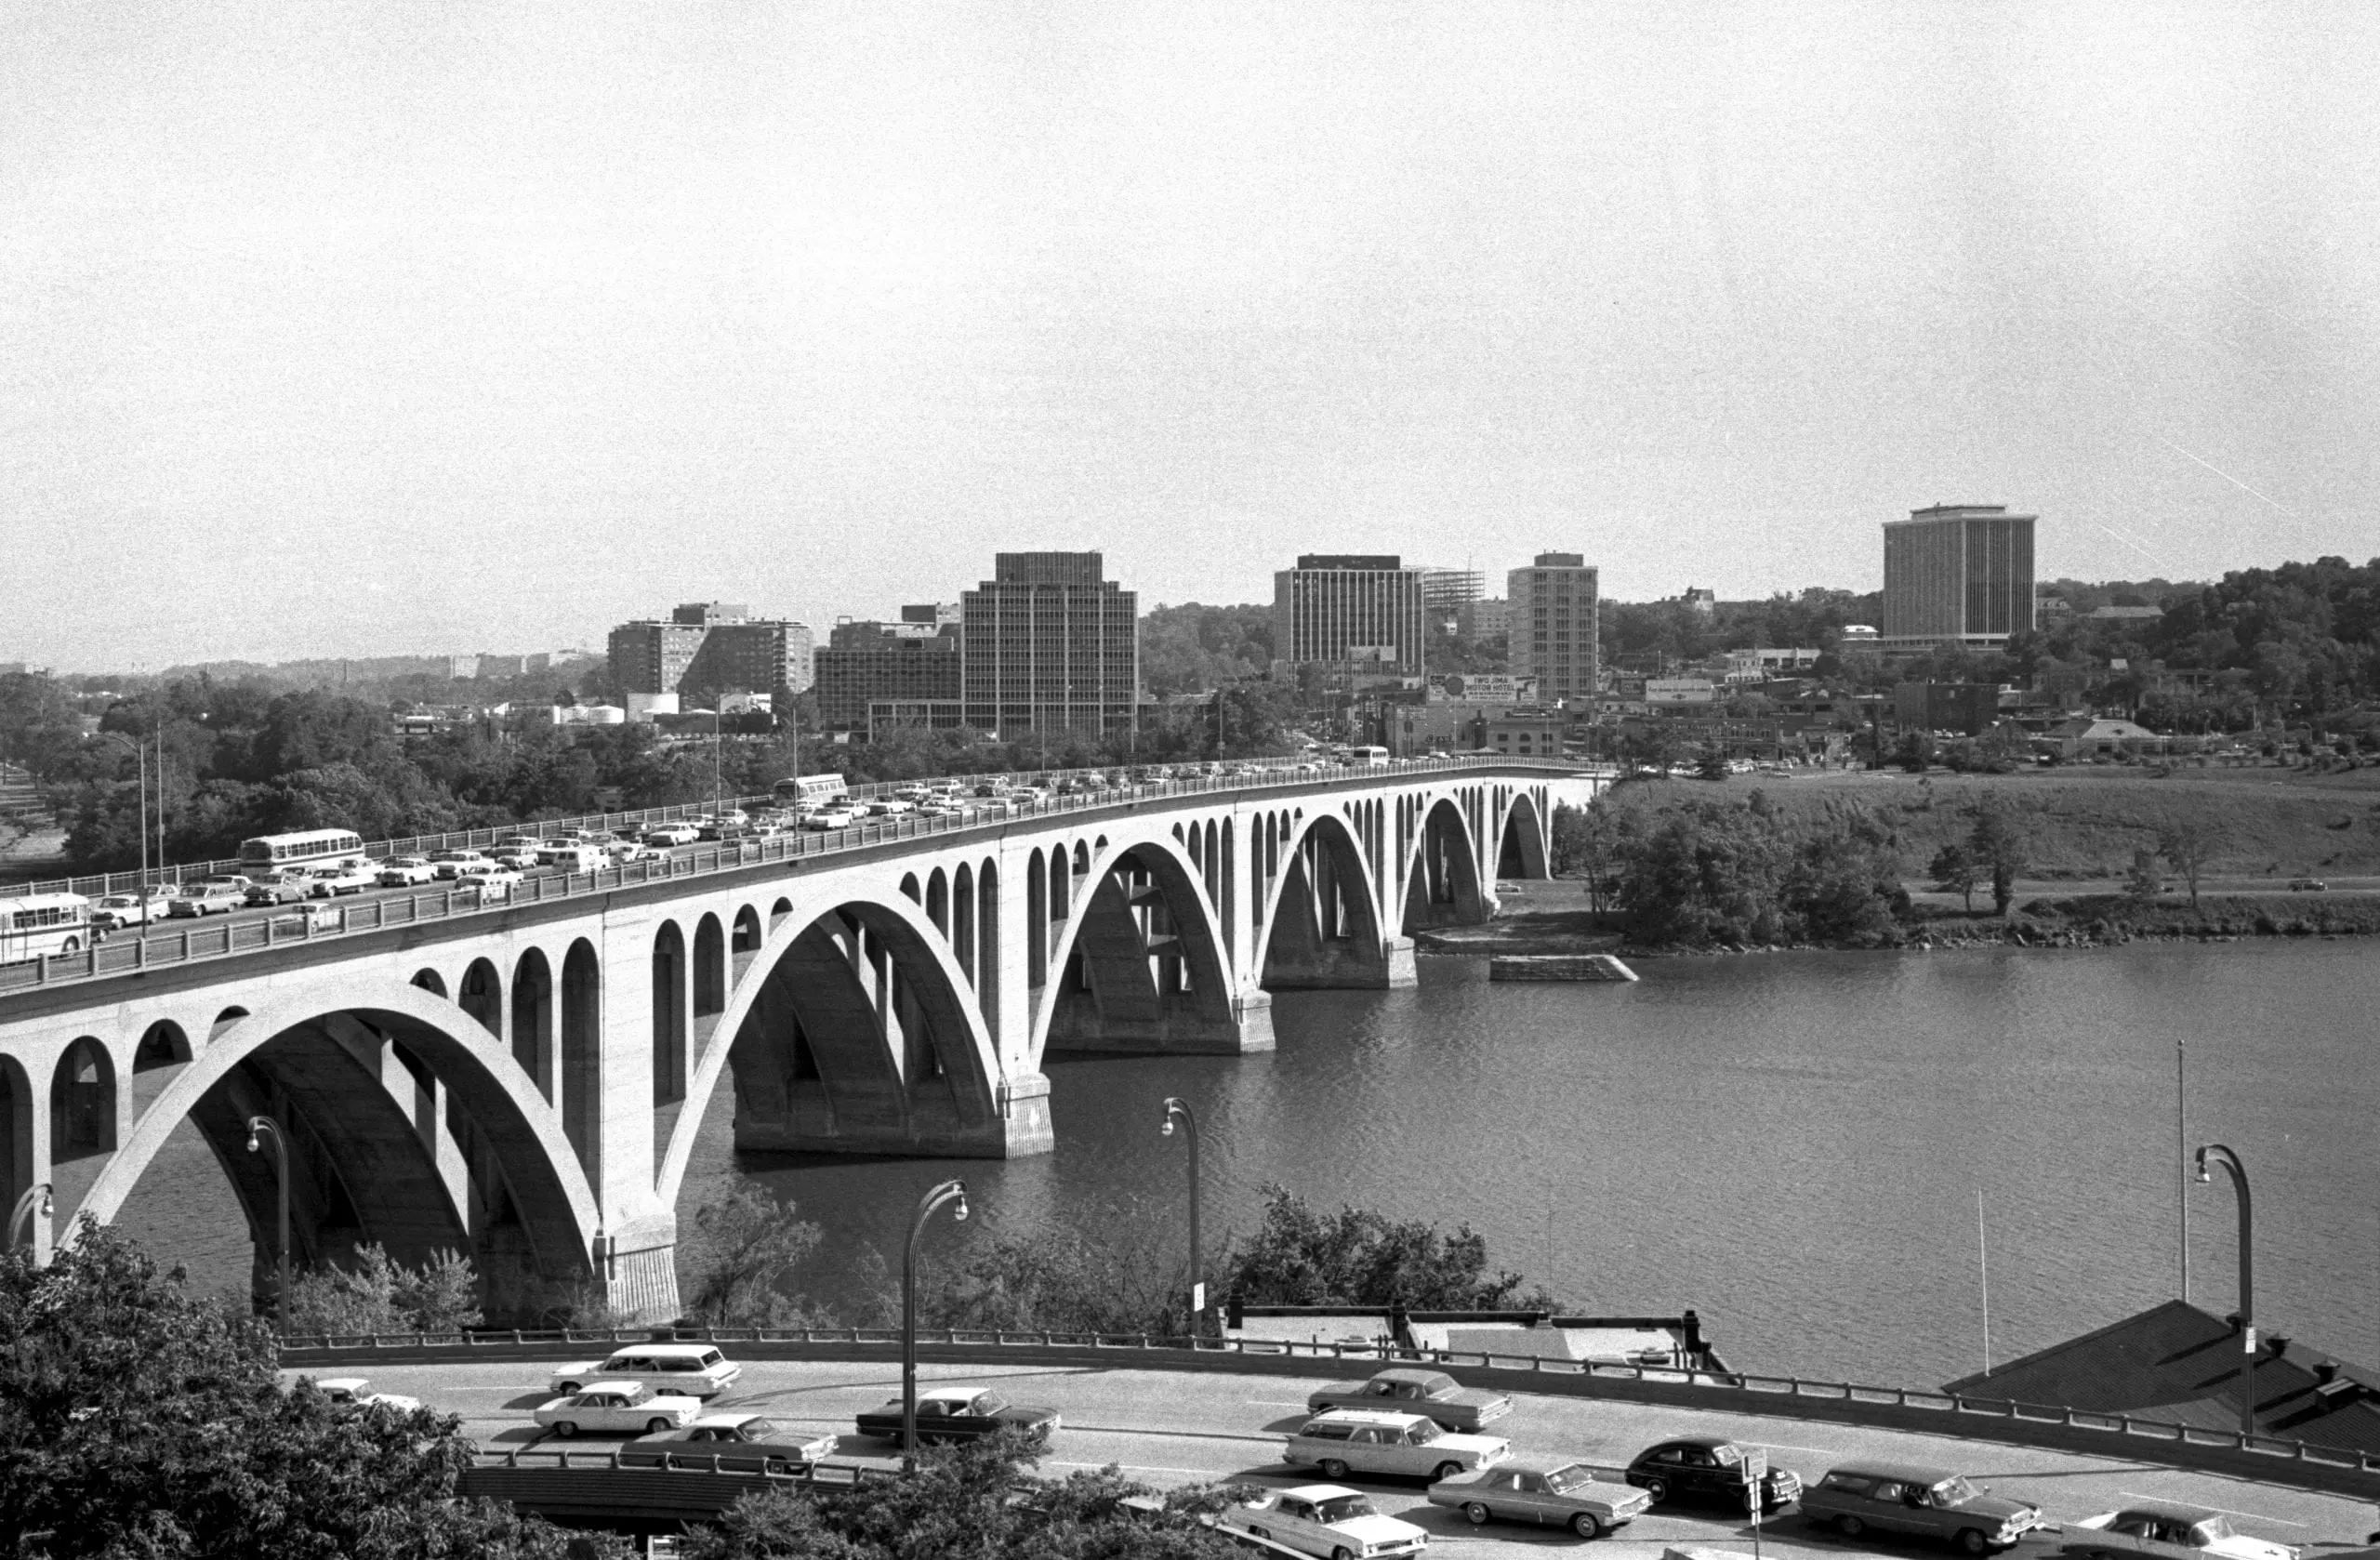 View of Rosslyn over the Key Bridge in 1964